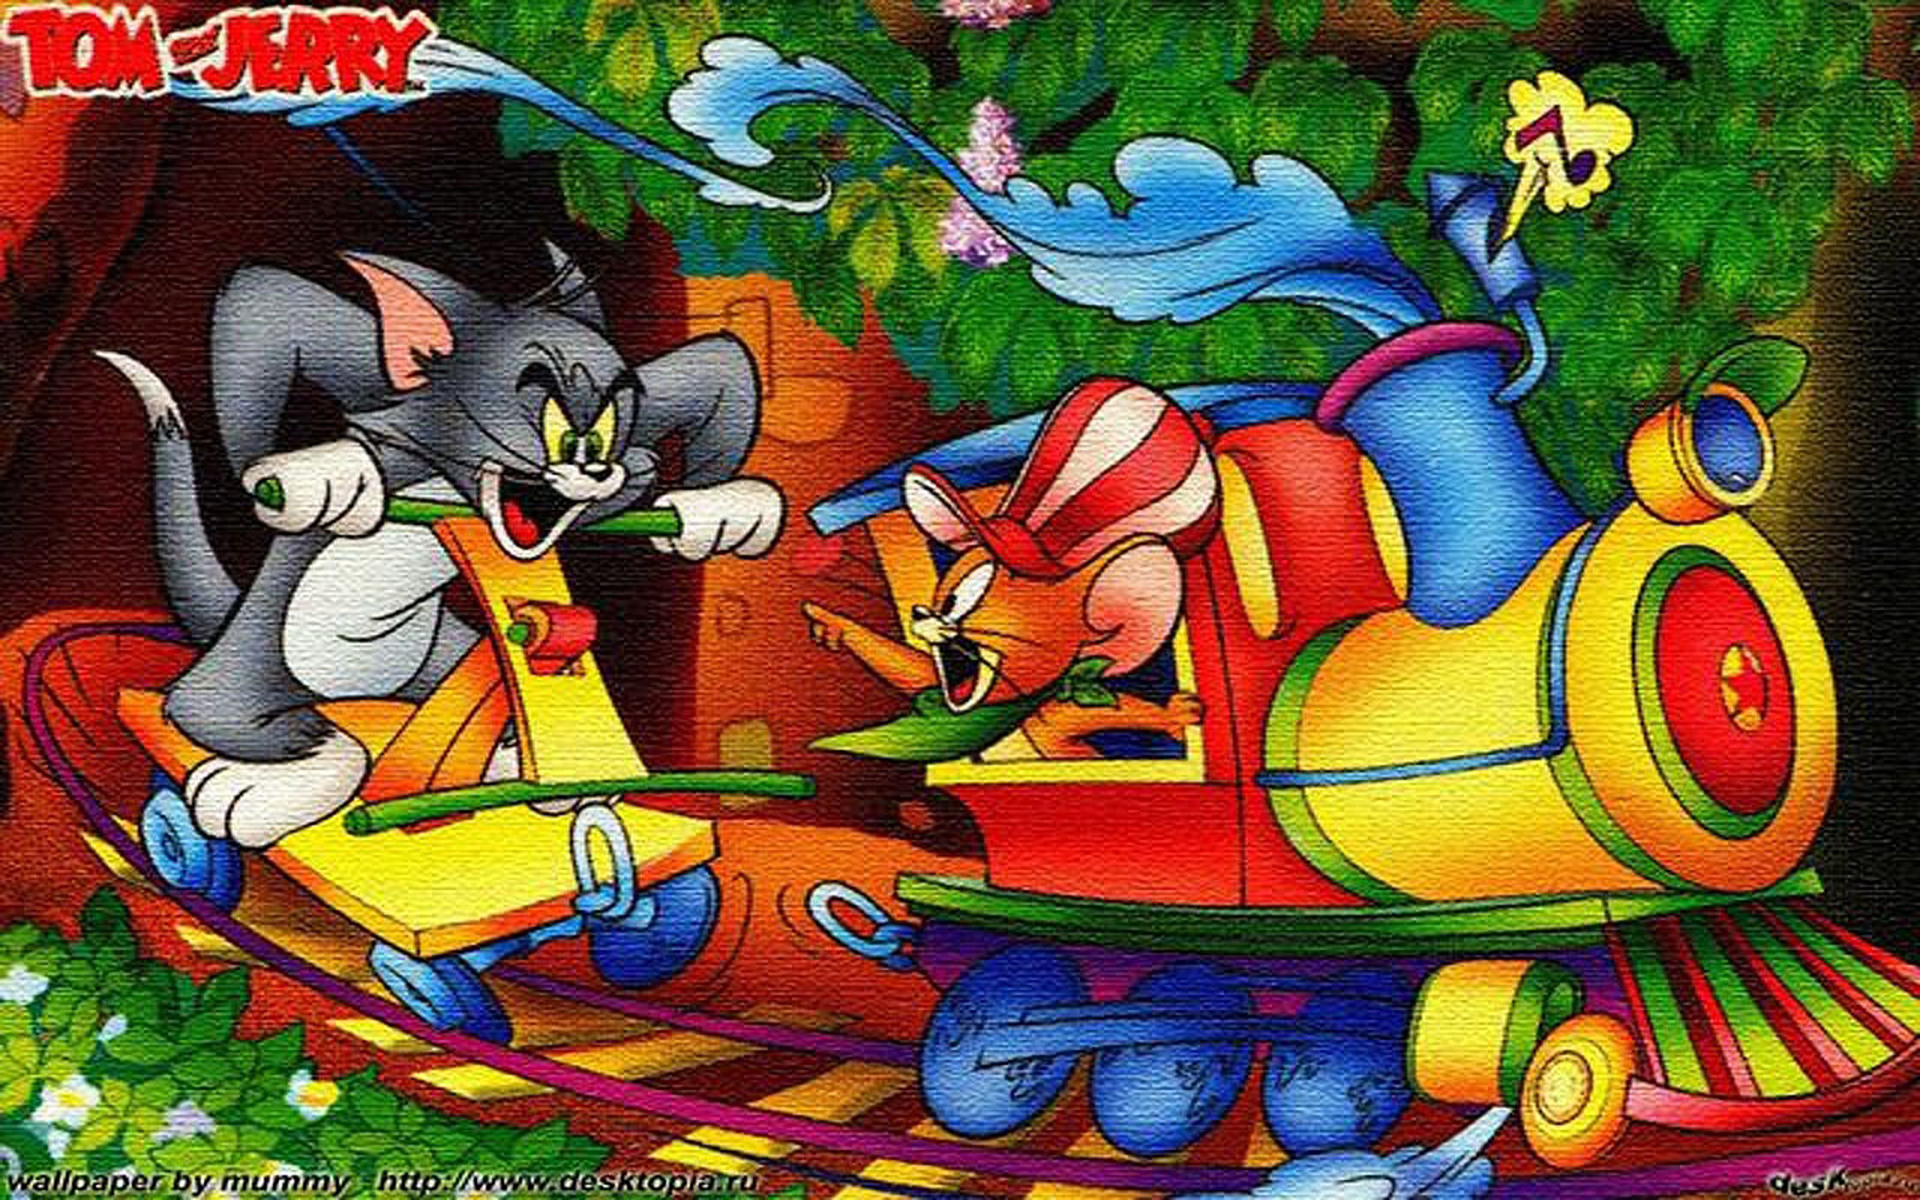 Tom And Jerry Cartoon Race Track Locomotive Desktop Hd Wallpaper For Mobile  Phones Tablet And Pc 1920x1200 : 